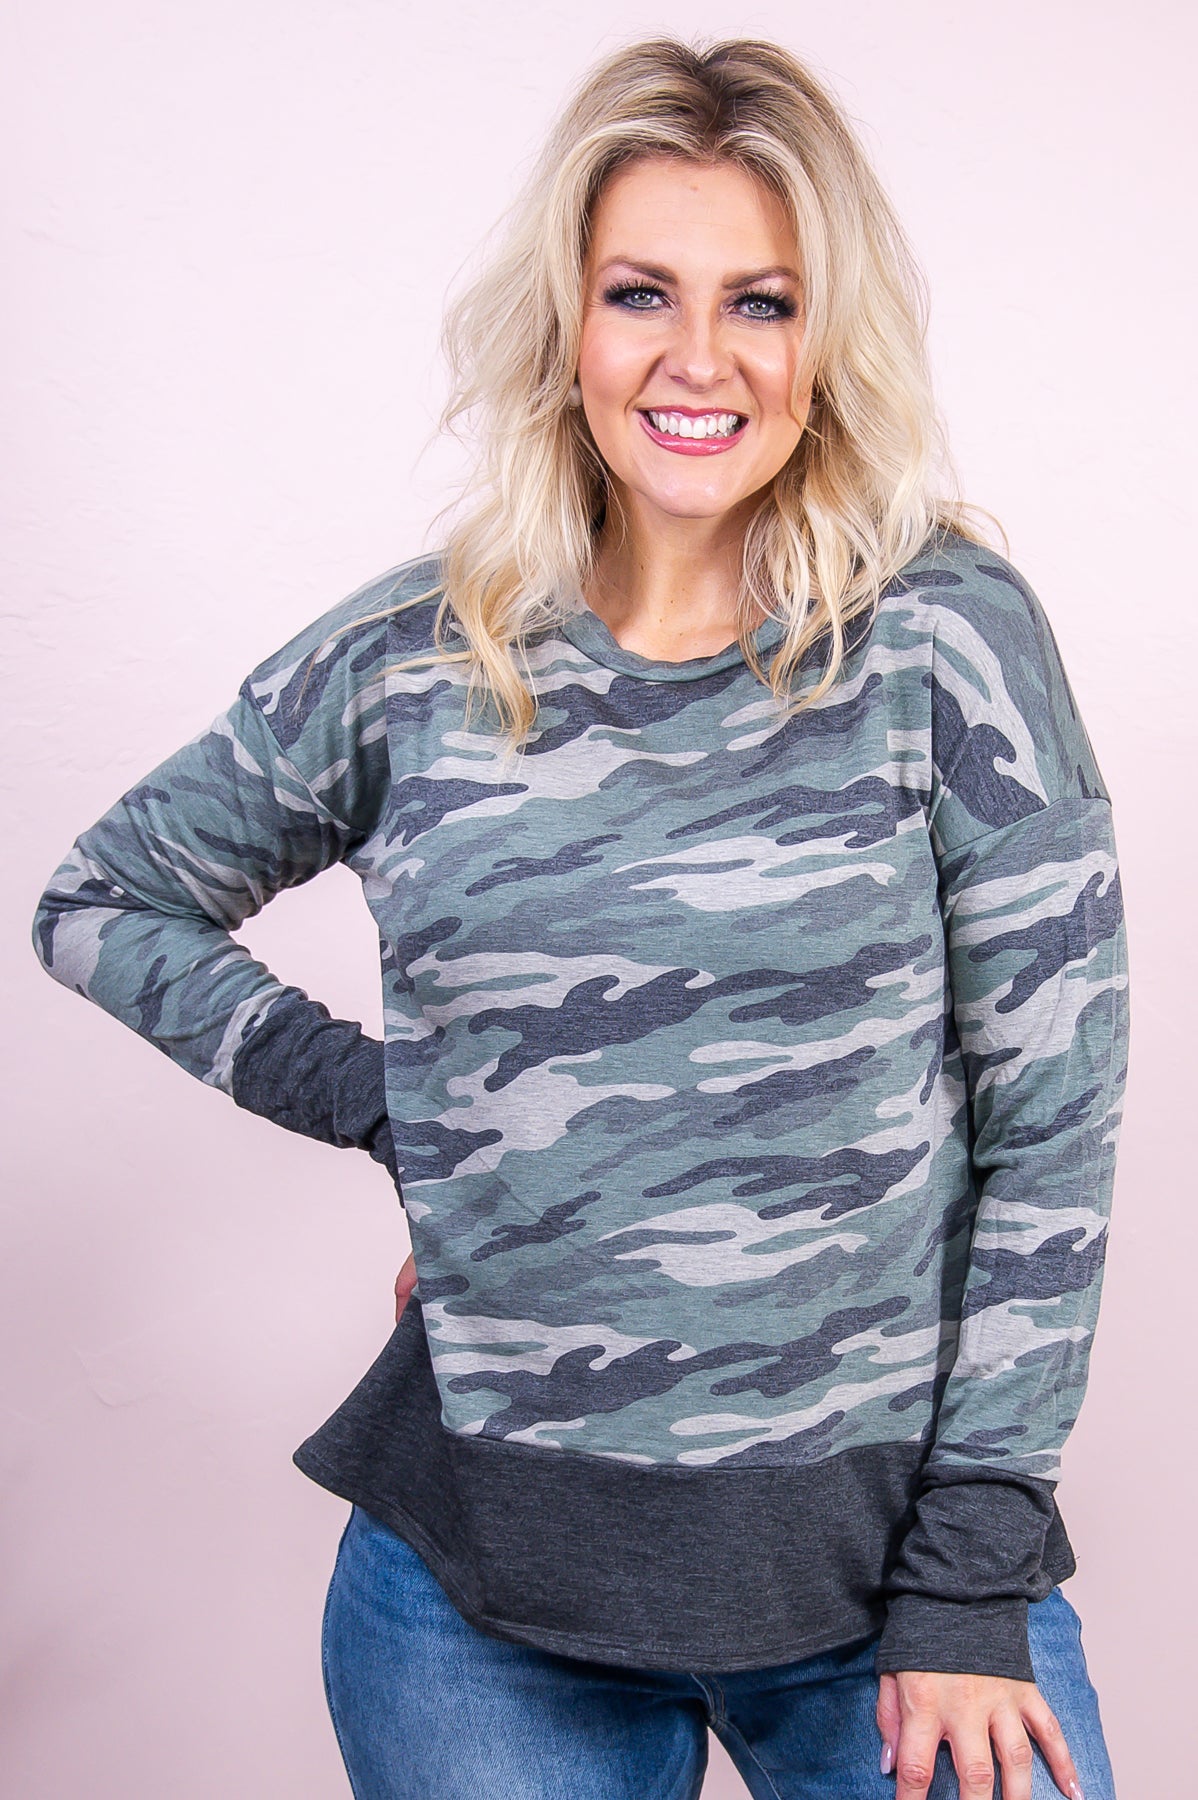 Missing You Always Olive/Multi Color Camouflage Top - T7999OL